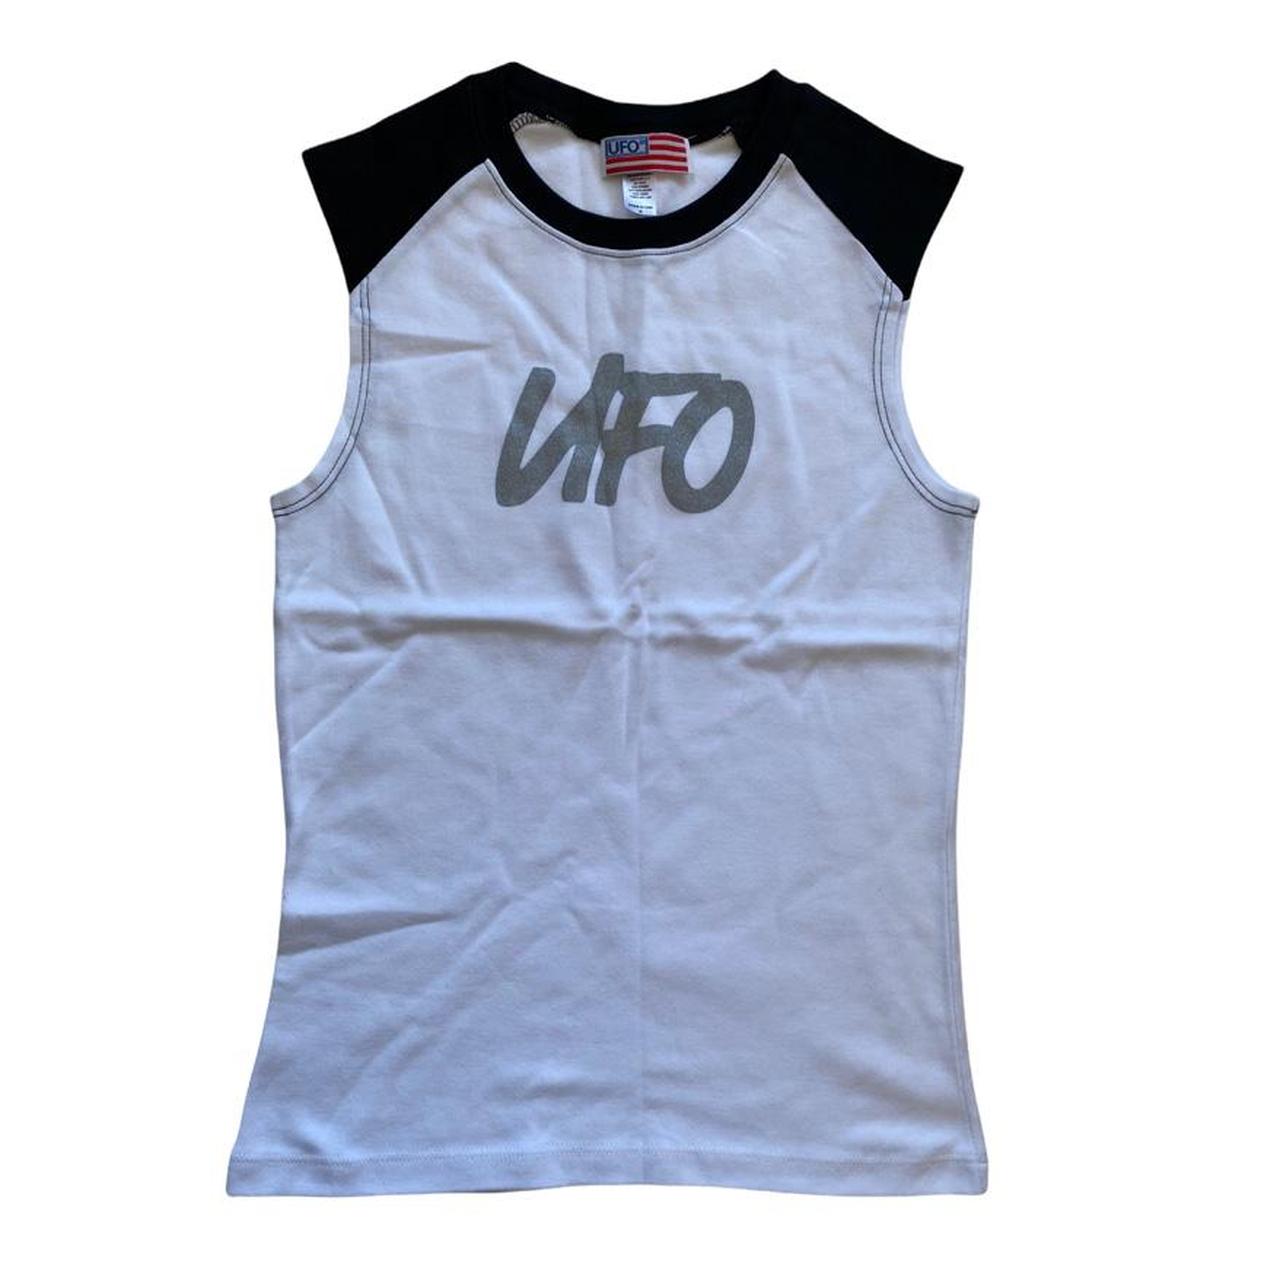 Product Image 1 - Brand new without tags sleeveless